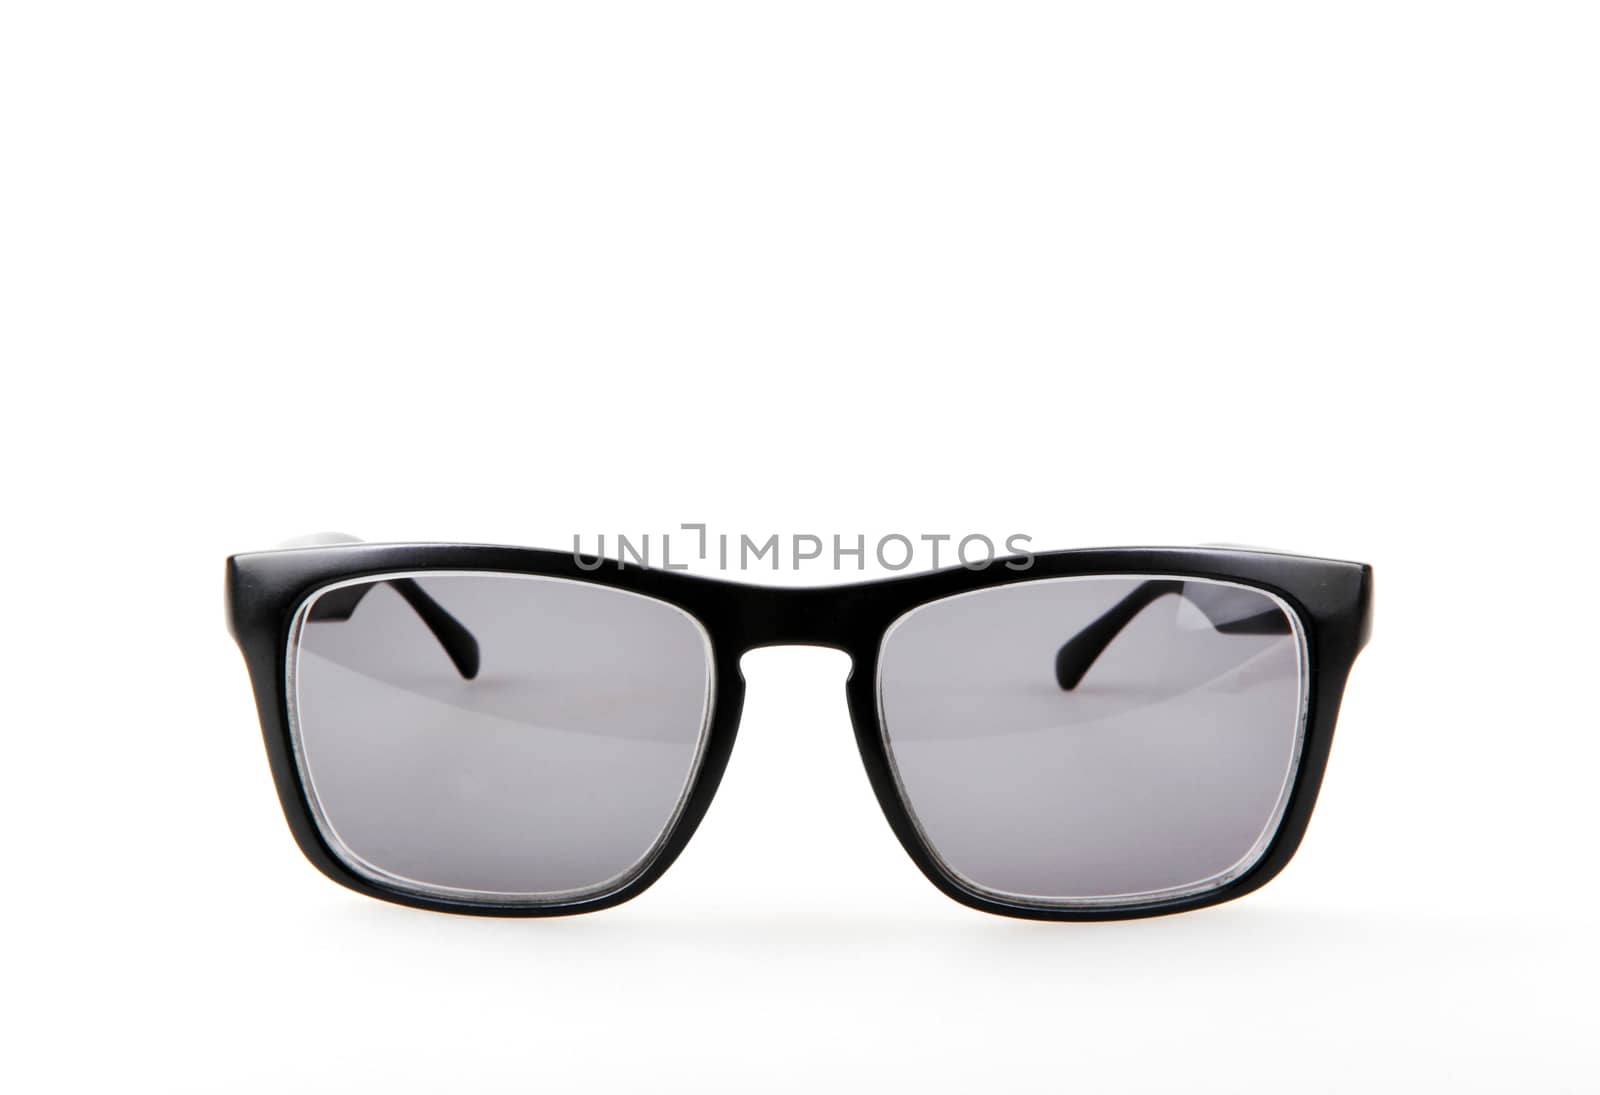 Close-Up Of Black Sunglasses Against White Background by nenovbrothers